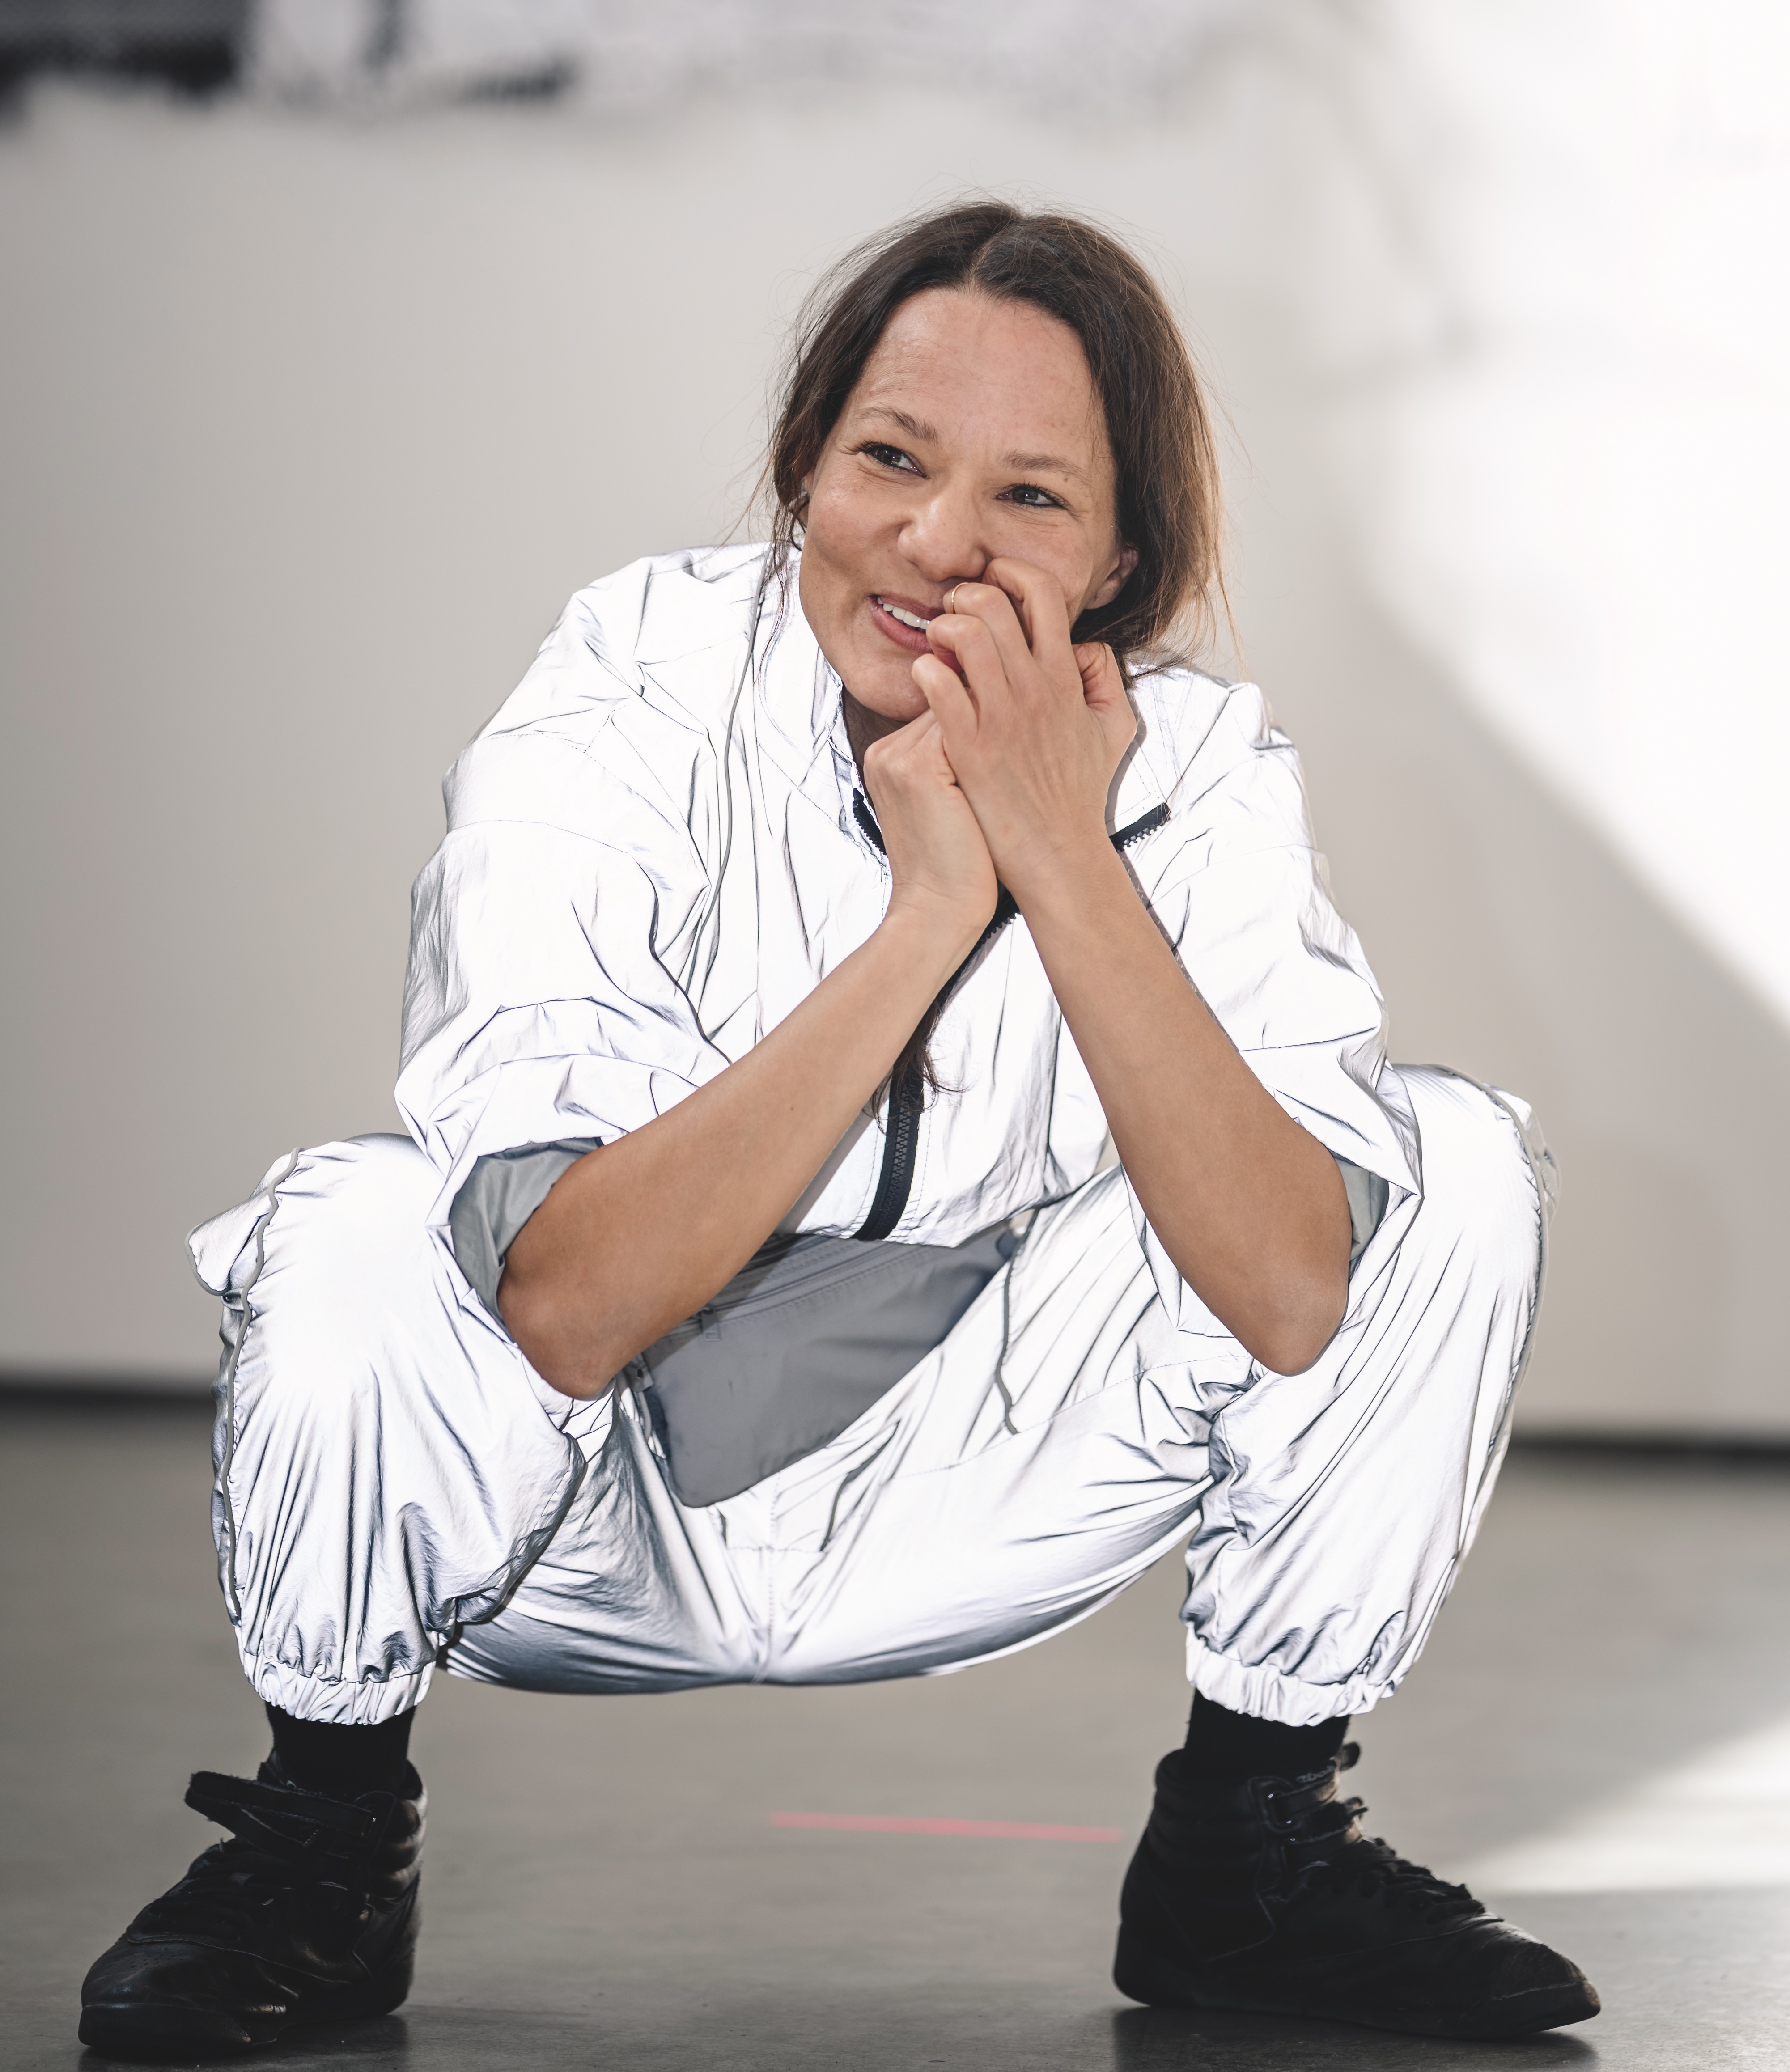 A women in a white jump suit is crouched smiling